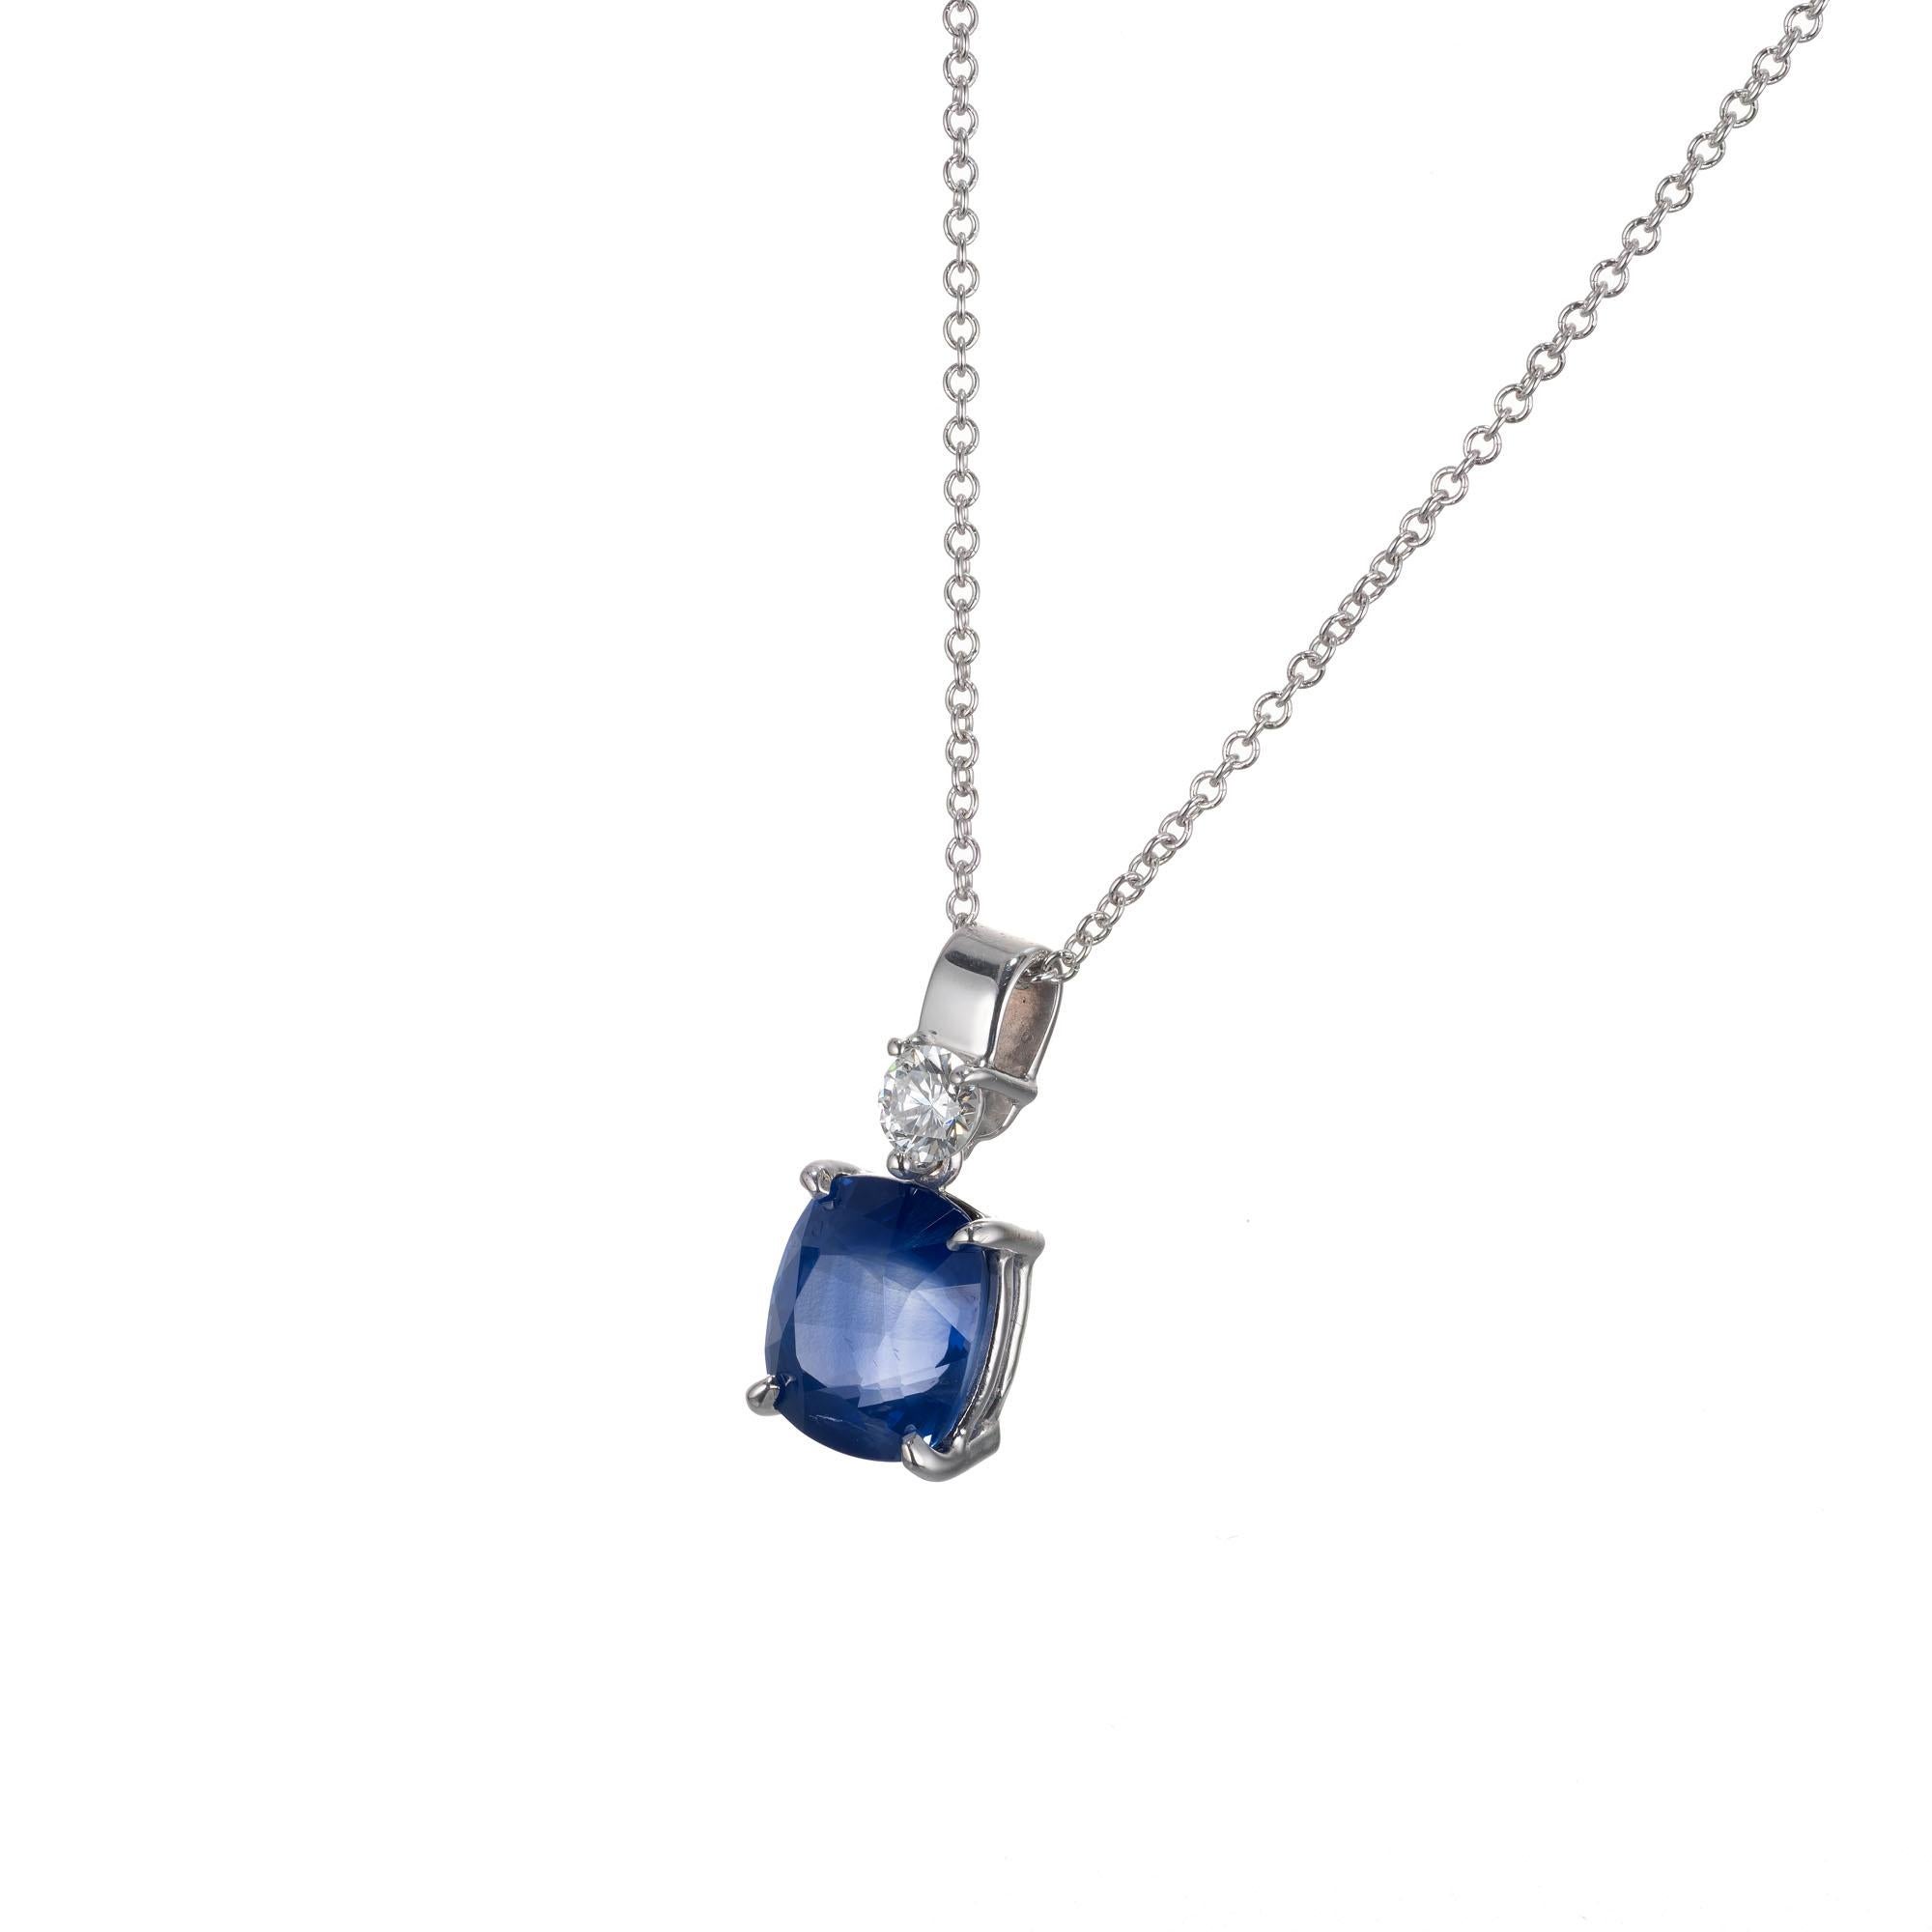 Peter Suchy cushion cut sapphire  and round diamond pendant necklace. Set in 14k white gold. GIA certified natural sapphire simple heat only. 

1 oval cushion blue sapphire, approx. 2.51ct GIA certificate # 1182062020
1 round brilliant cut diamond G